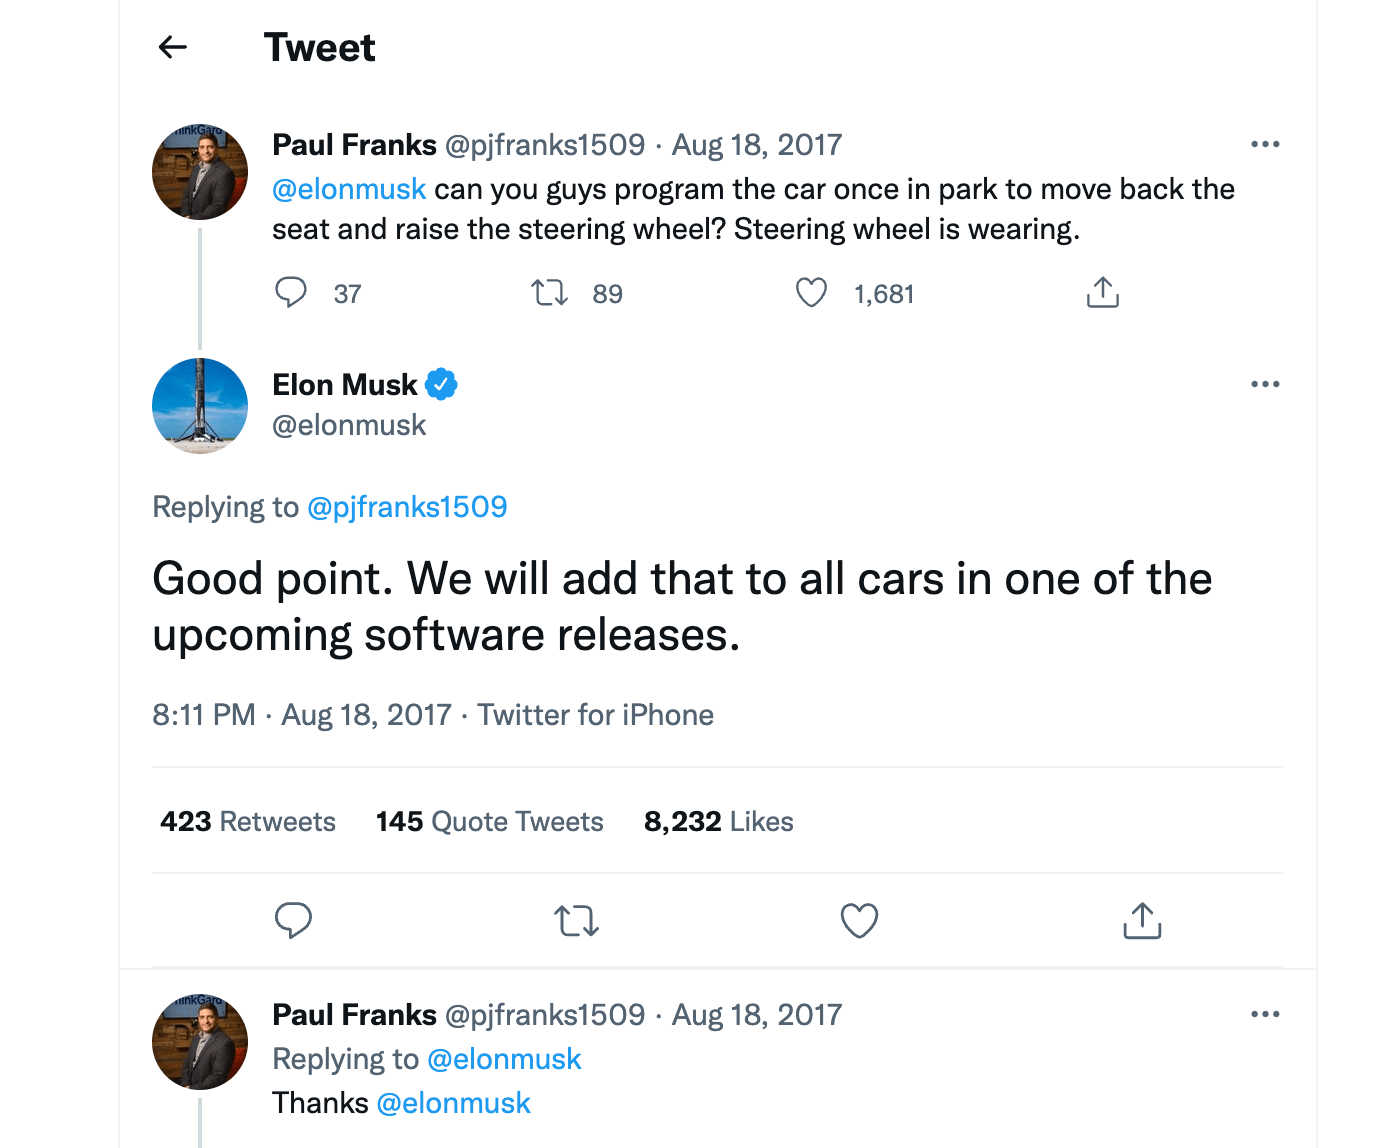 A twitter user asking Elon Musk to program the Tesla steering wheel in a particular way and Elon Musk agreeing to.